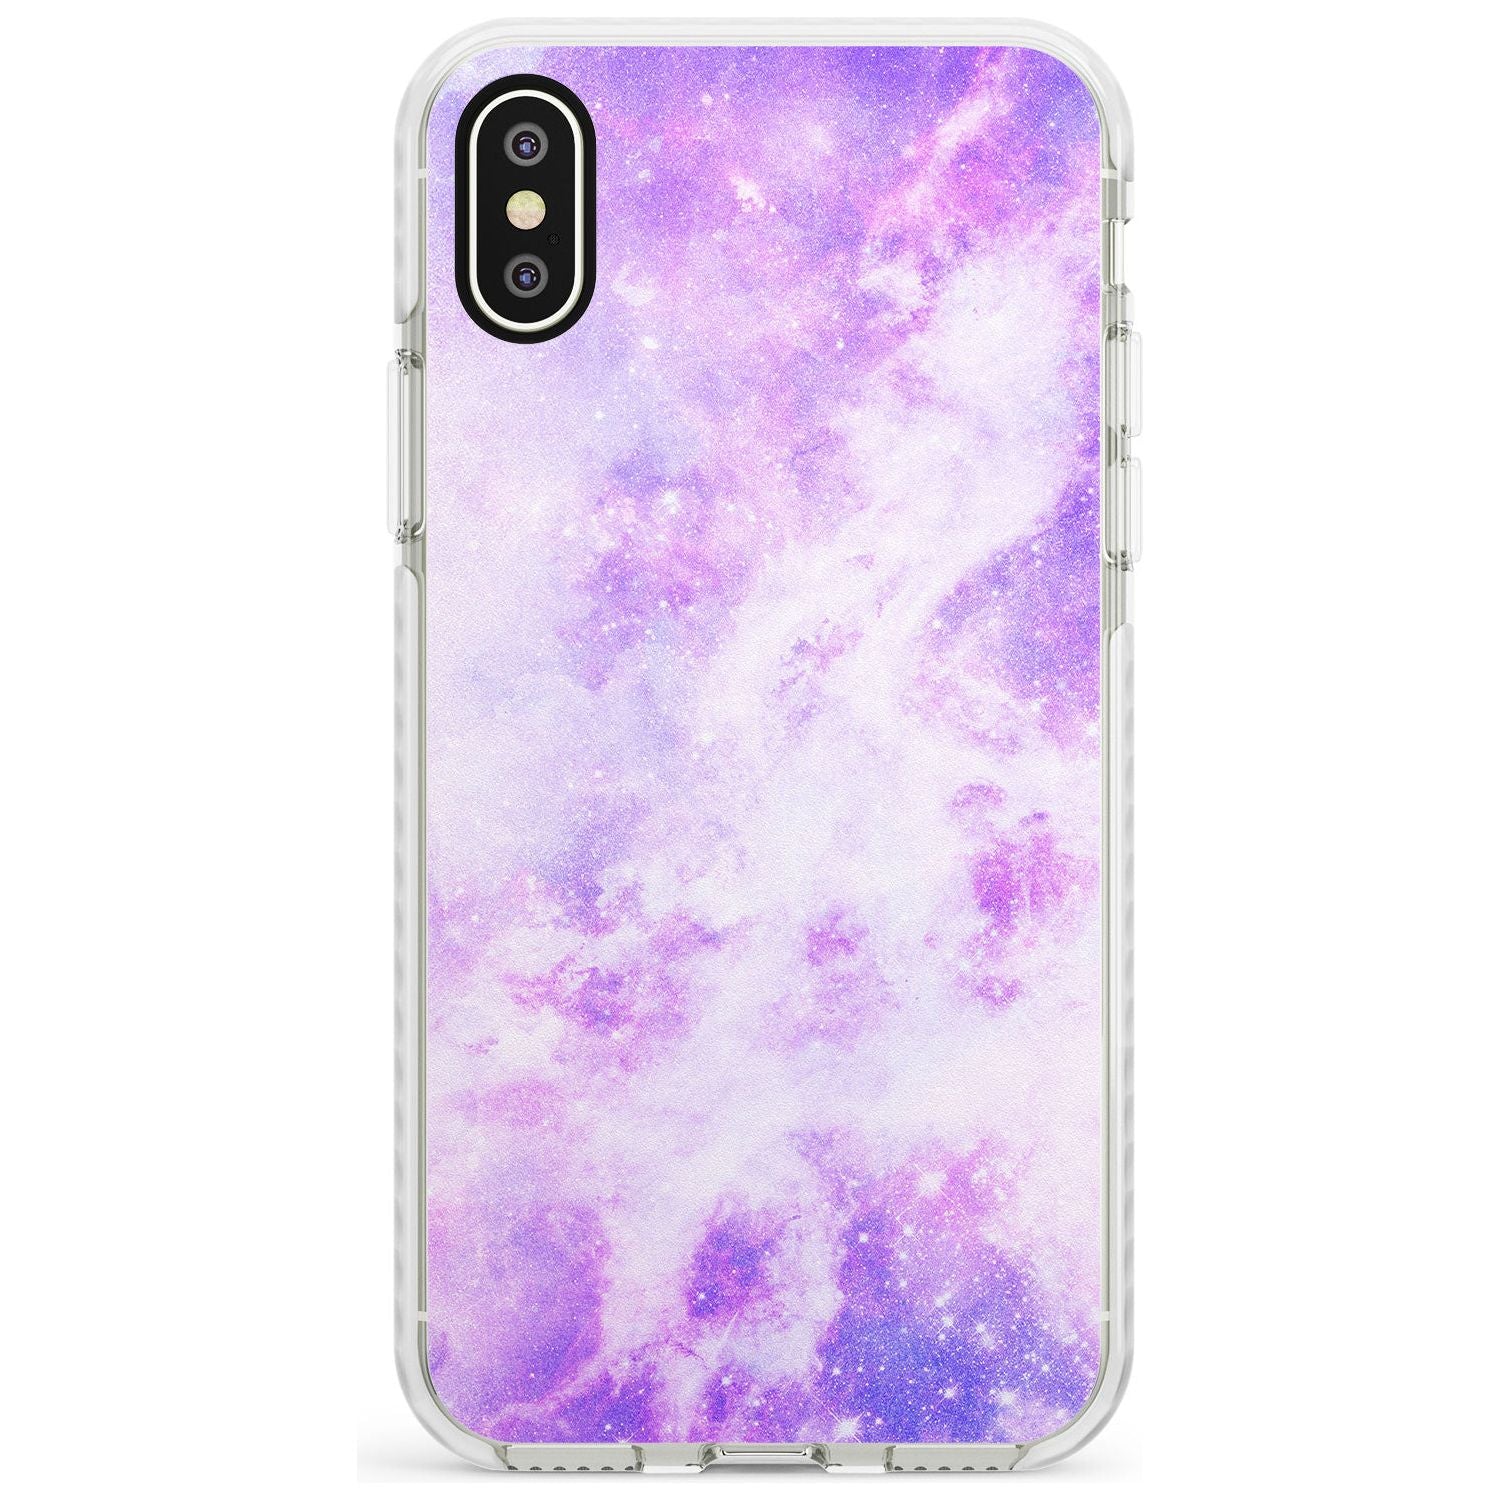 Purple Galaxy Pattern Design Impact Phone Case for iPhone X XS Max XR